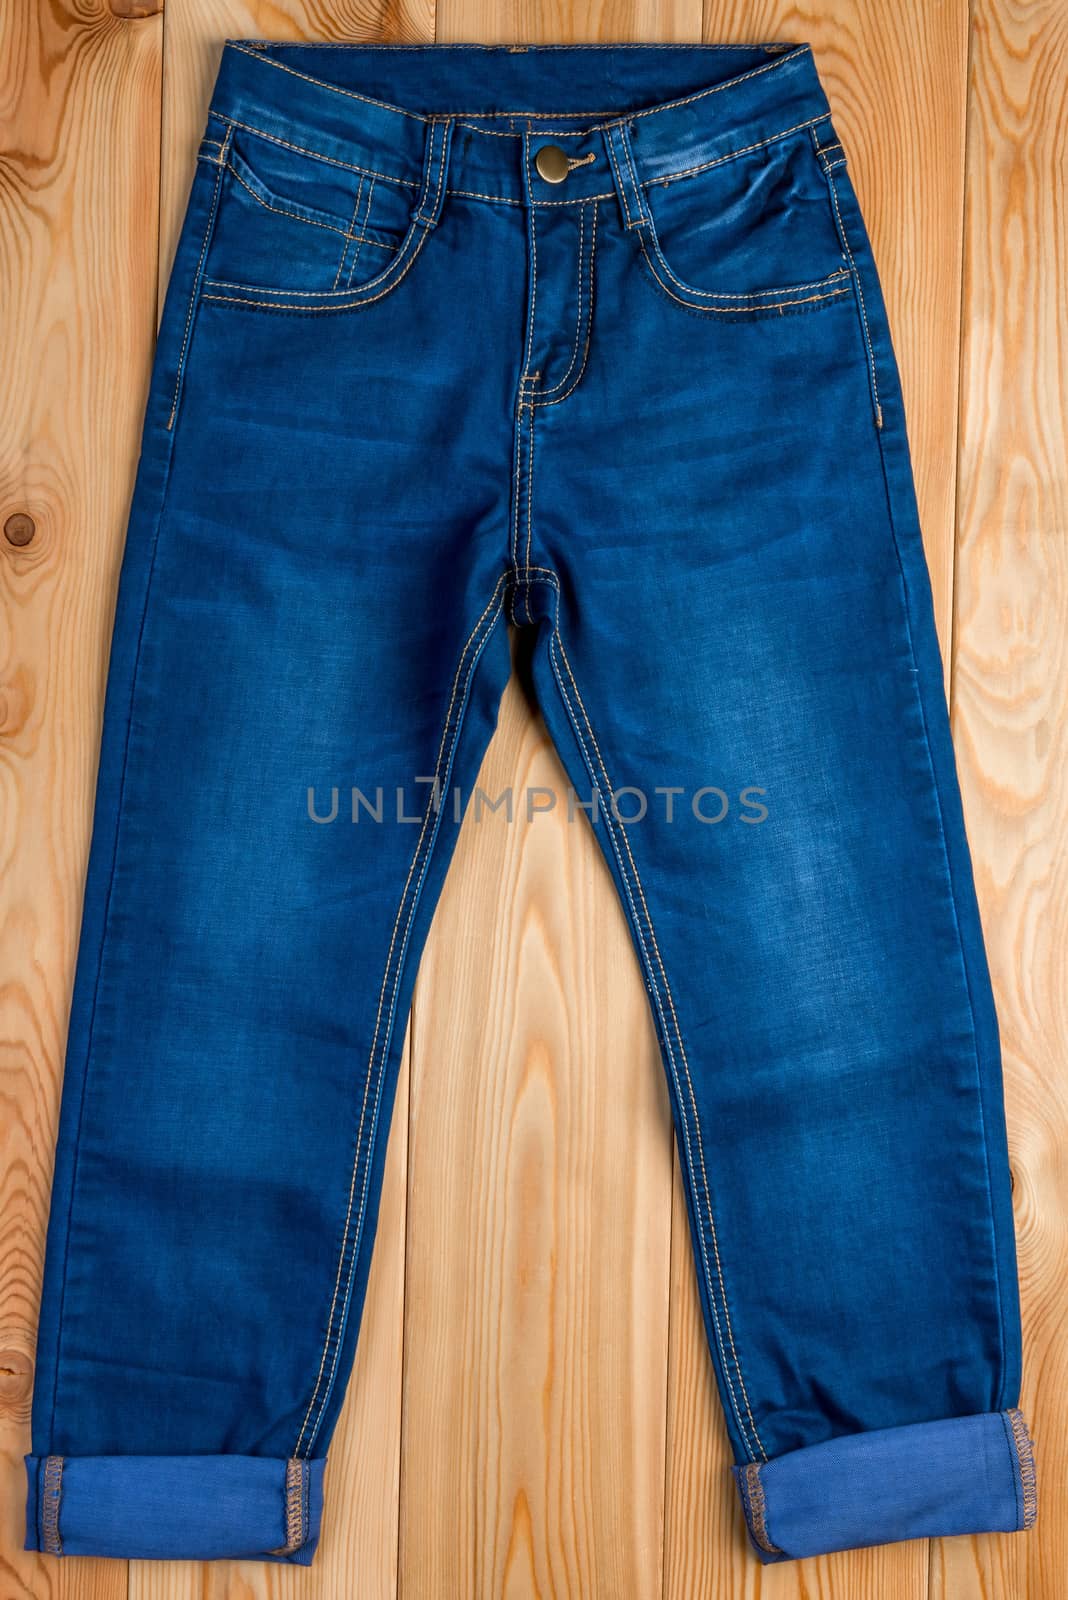 dark blue jeans for a boy on a wooden floor top view by kosmsos111